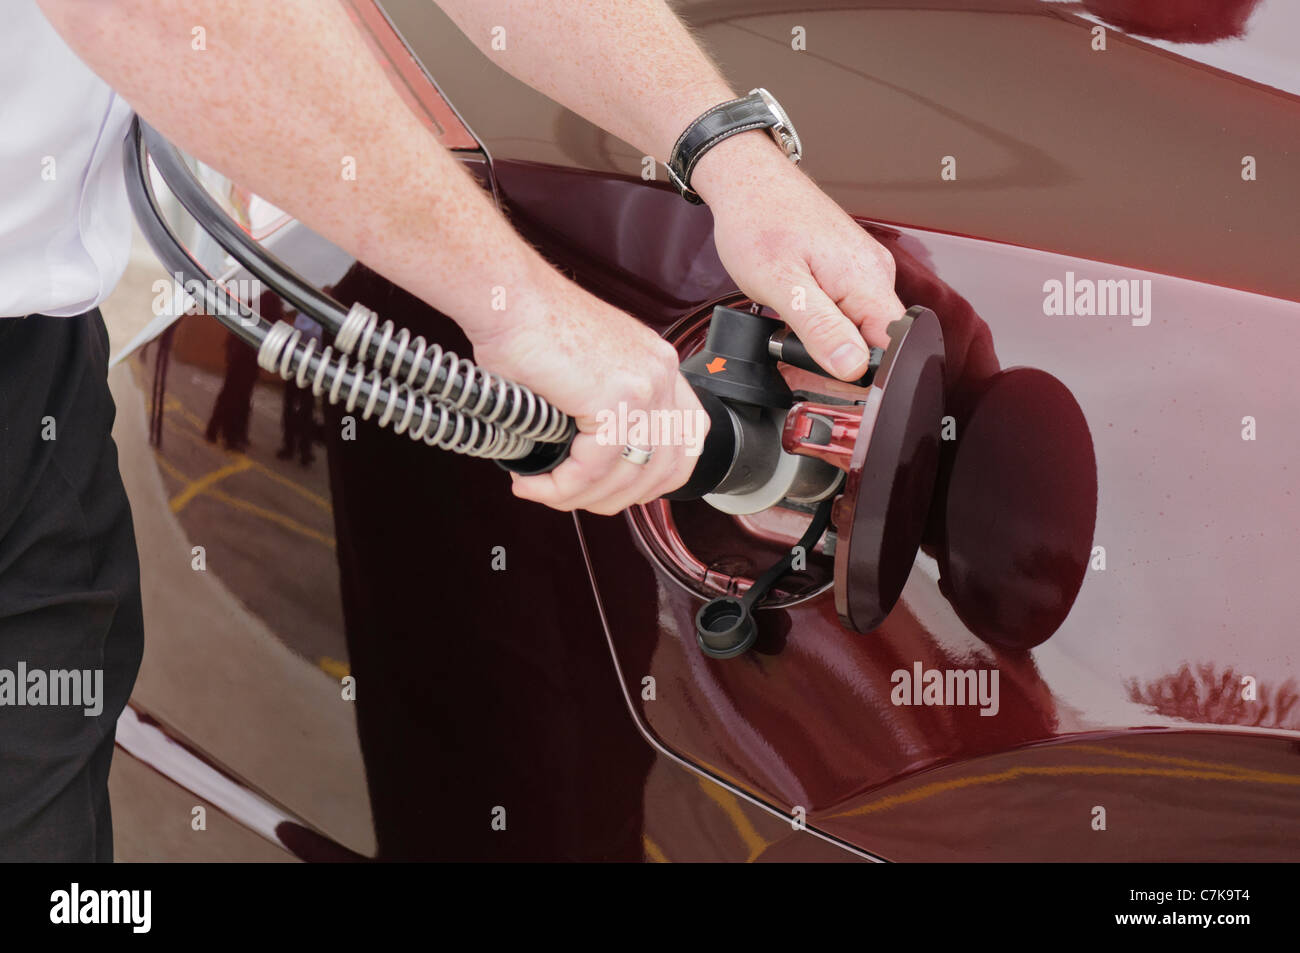 Man attaches nozzle to car while refuelling a hydrogen powered vehicle Stock Photo